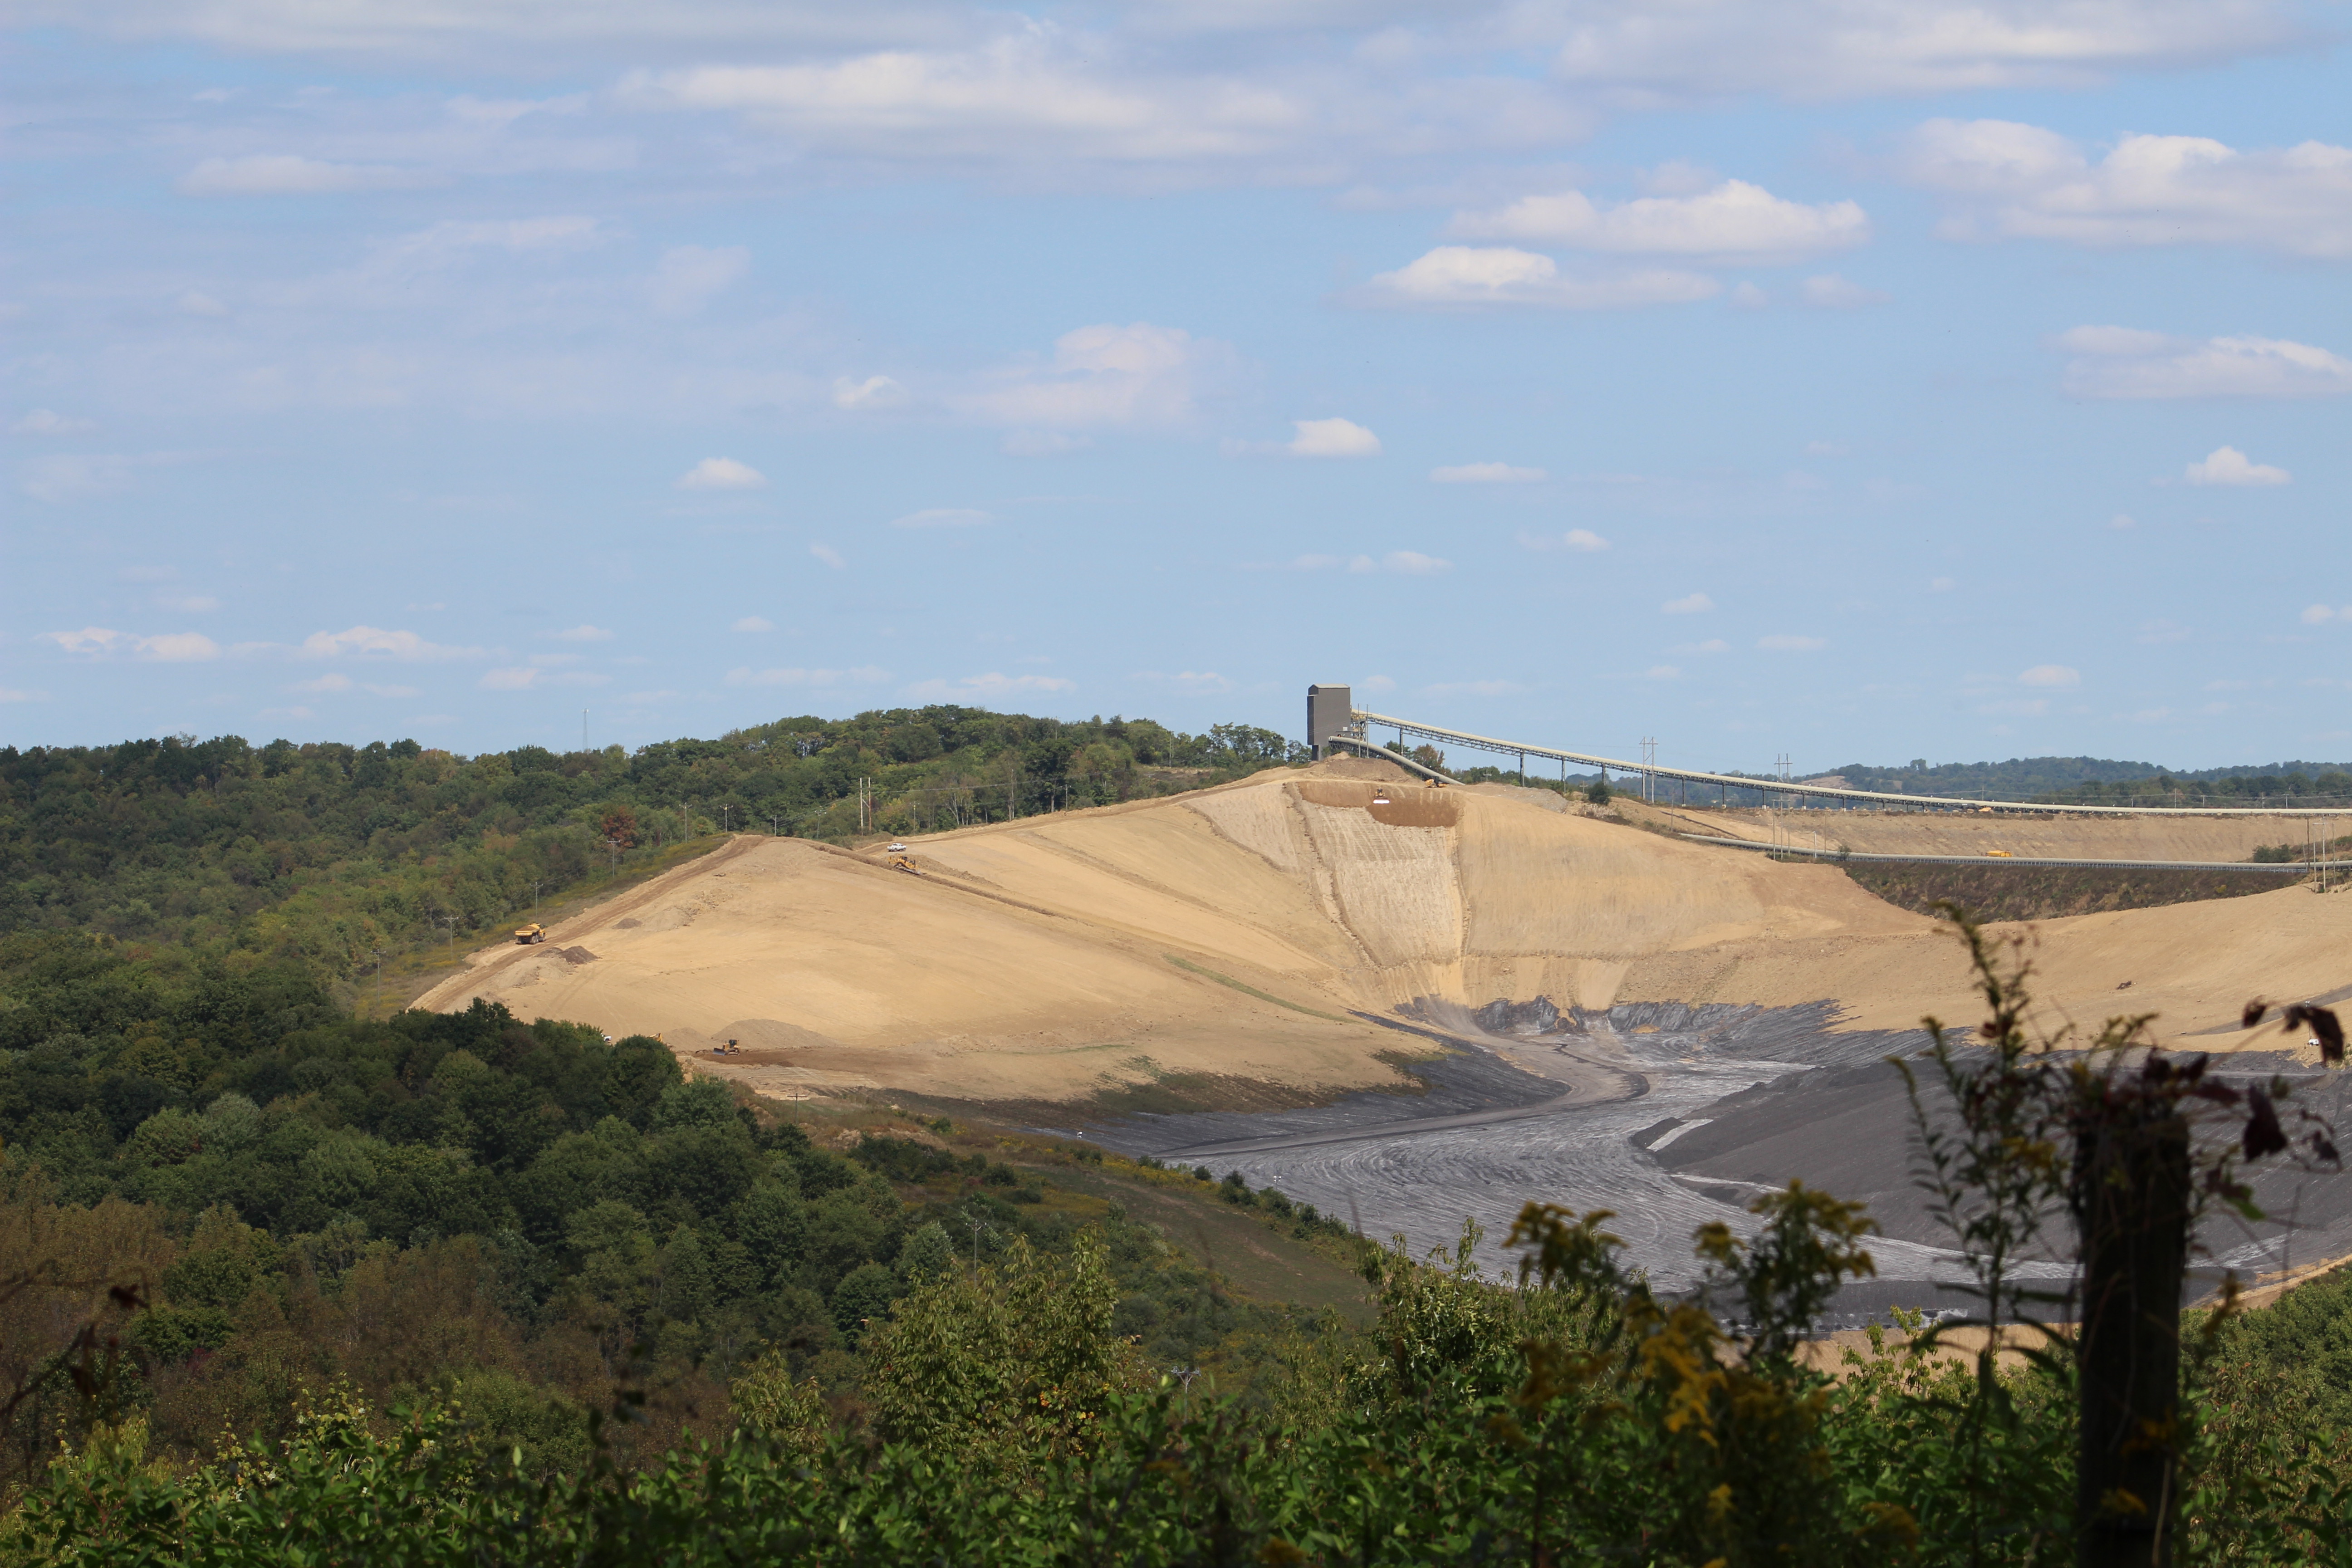 Photo of a coal refuse disposal area from Consol Bailey Mine Complex in Richhill Township Greene County.